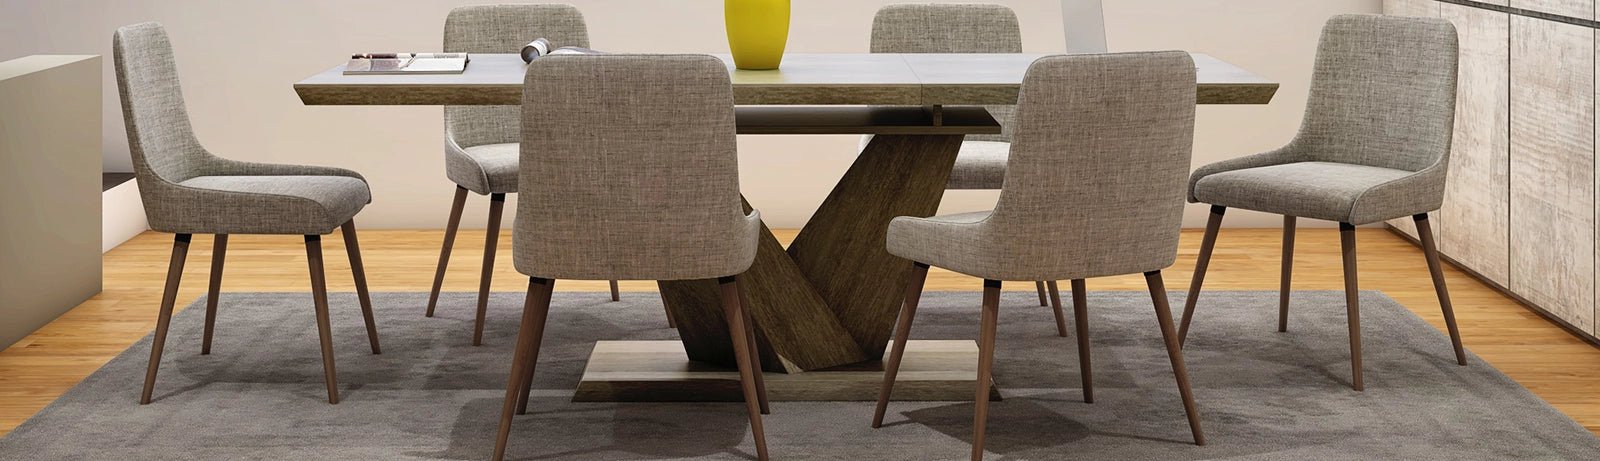 Dining Chairs - Berre Furniture